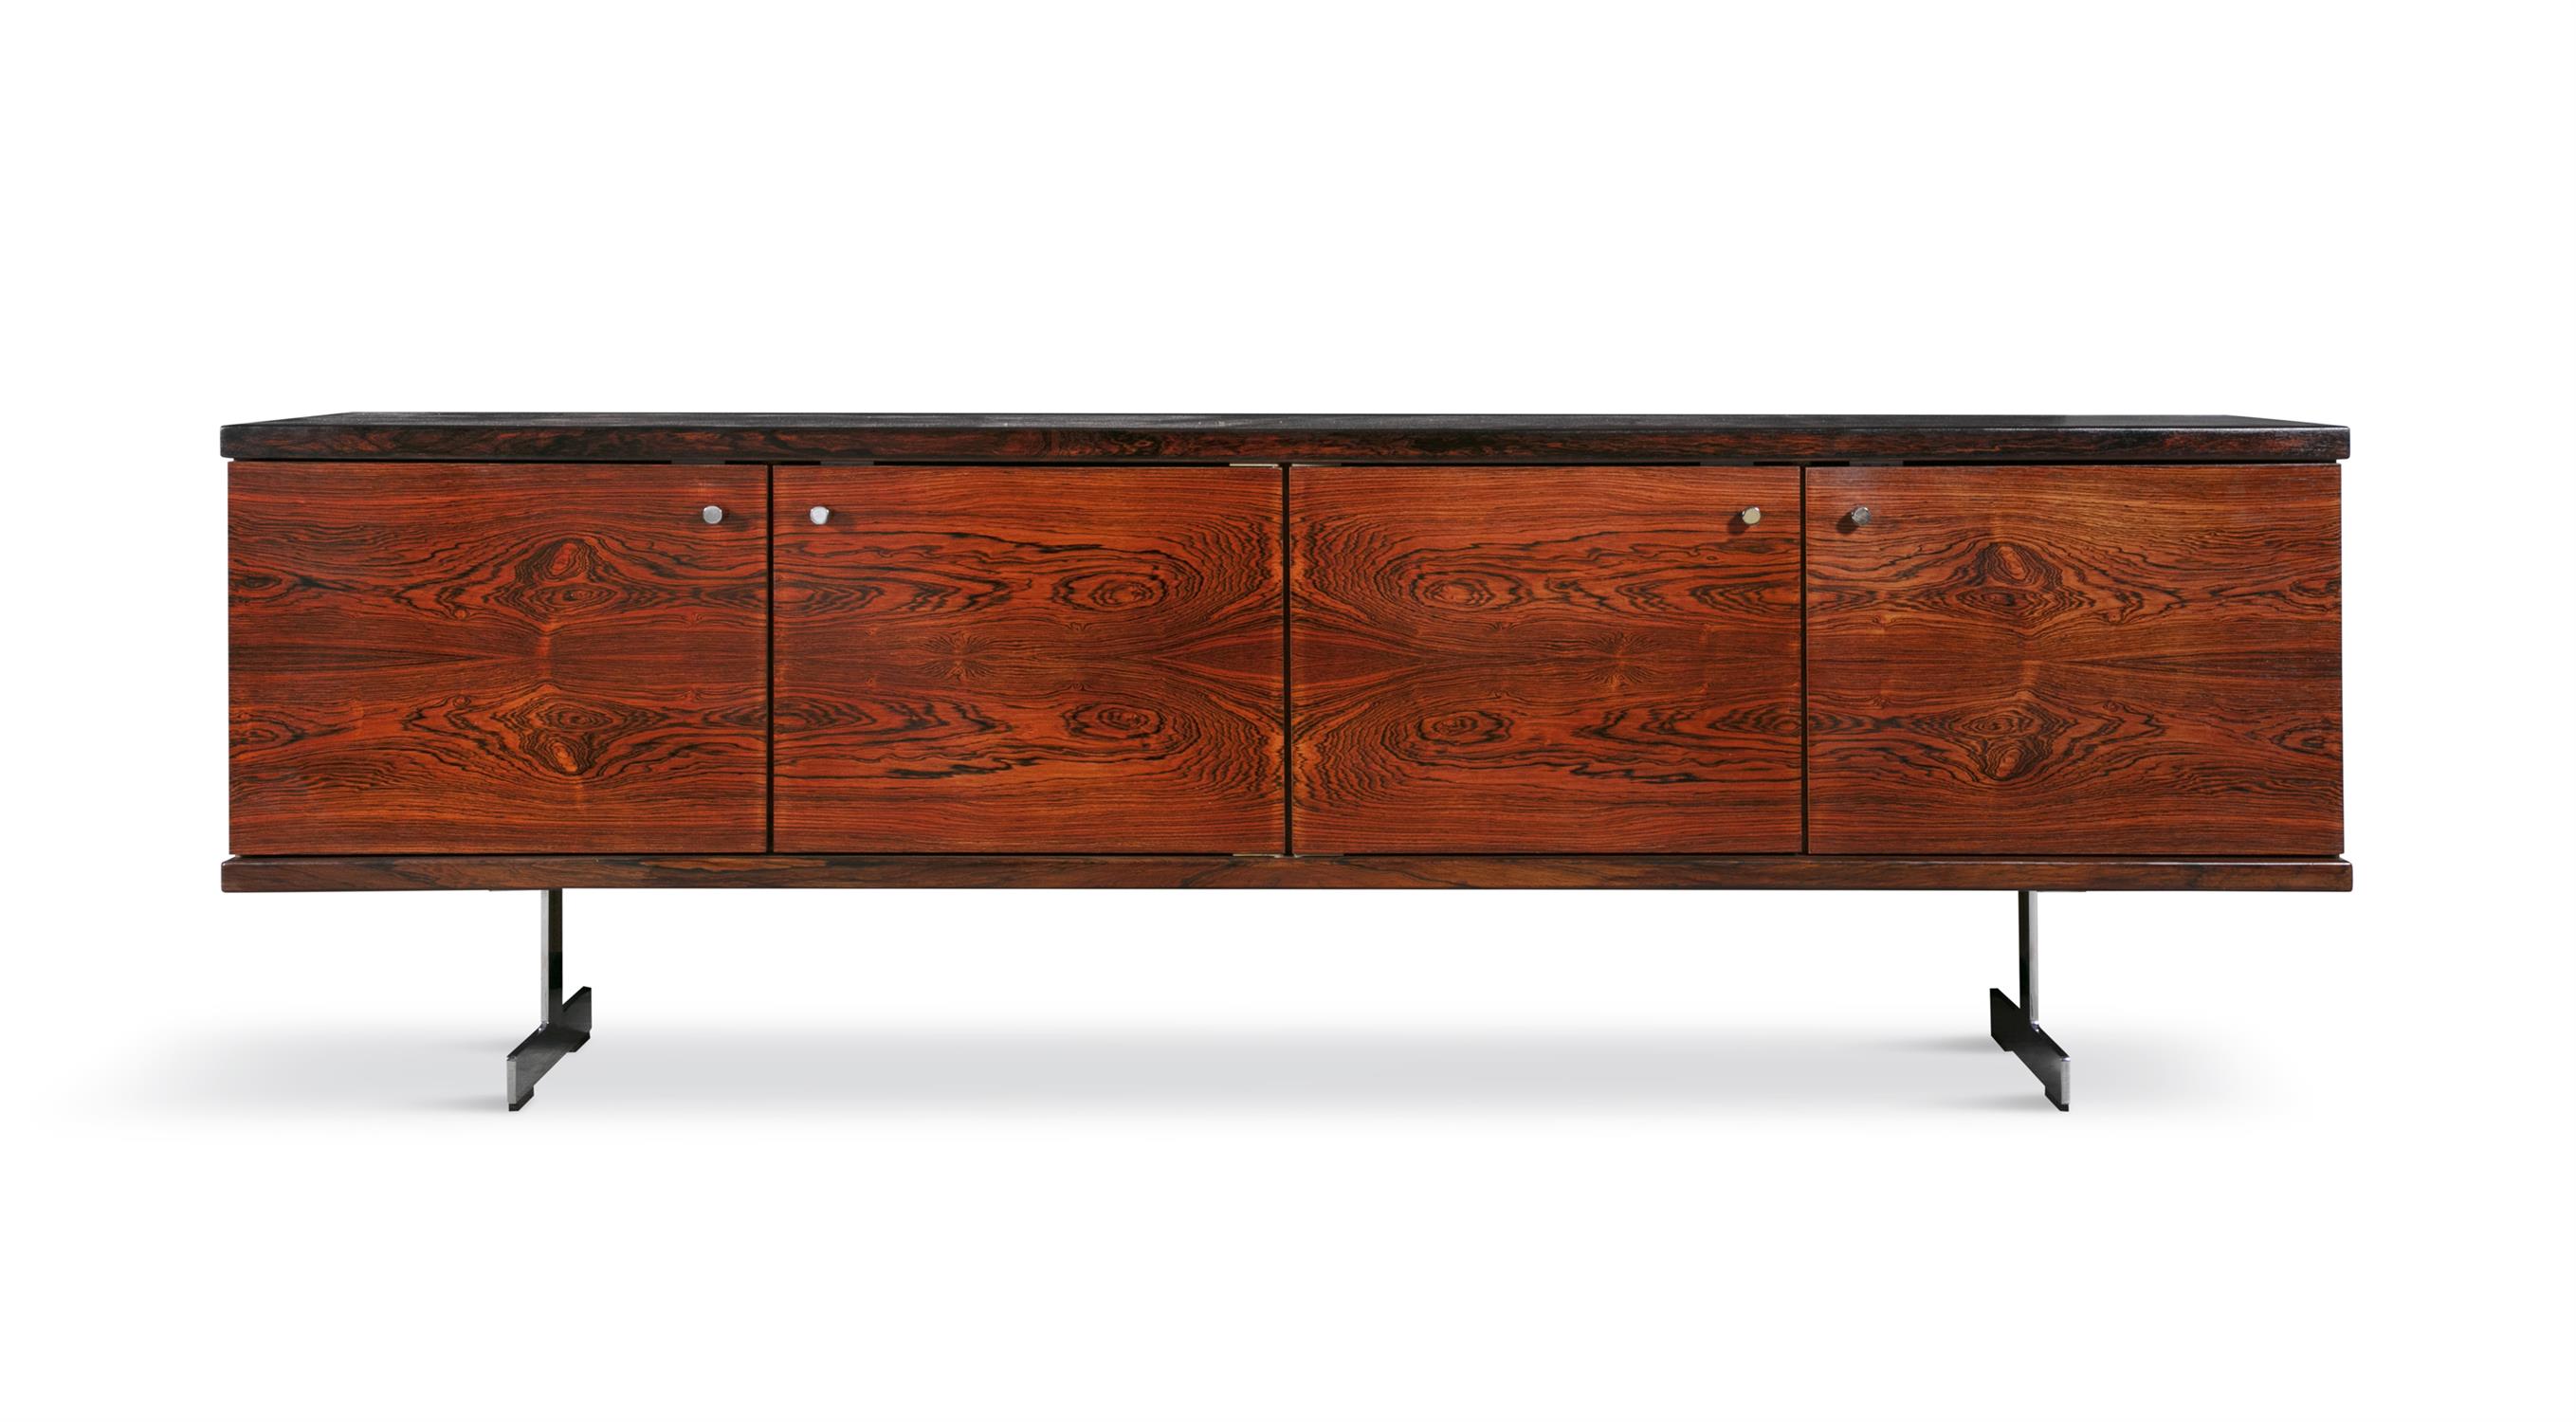 ROBIN DAY (1913 - 2000) A rosewood sideboard by Robin Day. UK, c.1960. 214 x 46 x 72.5cm(h) - Image 2 of 5